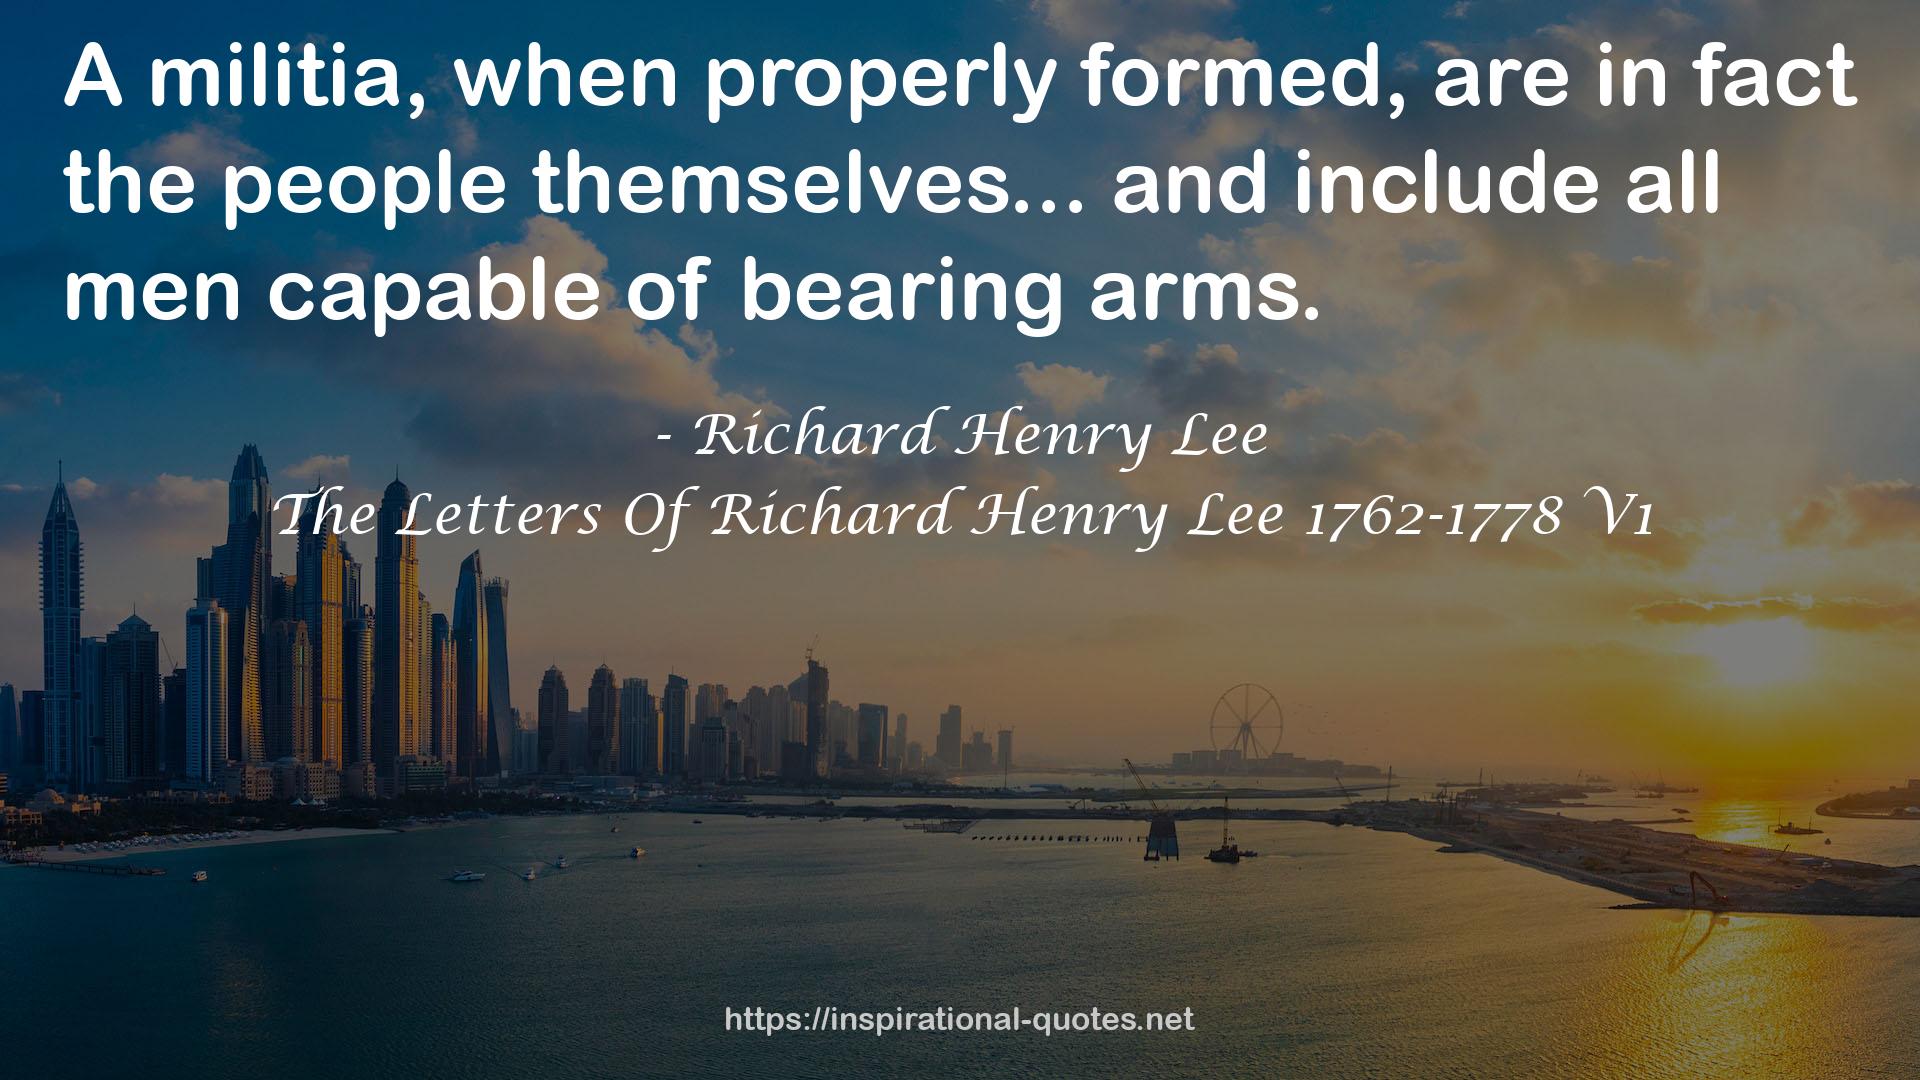 The Letters Of Richard Henry Lee 1762-1778 V1 QUOTES